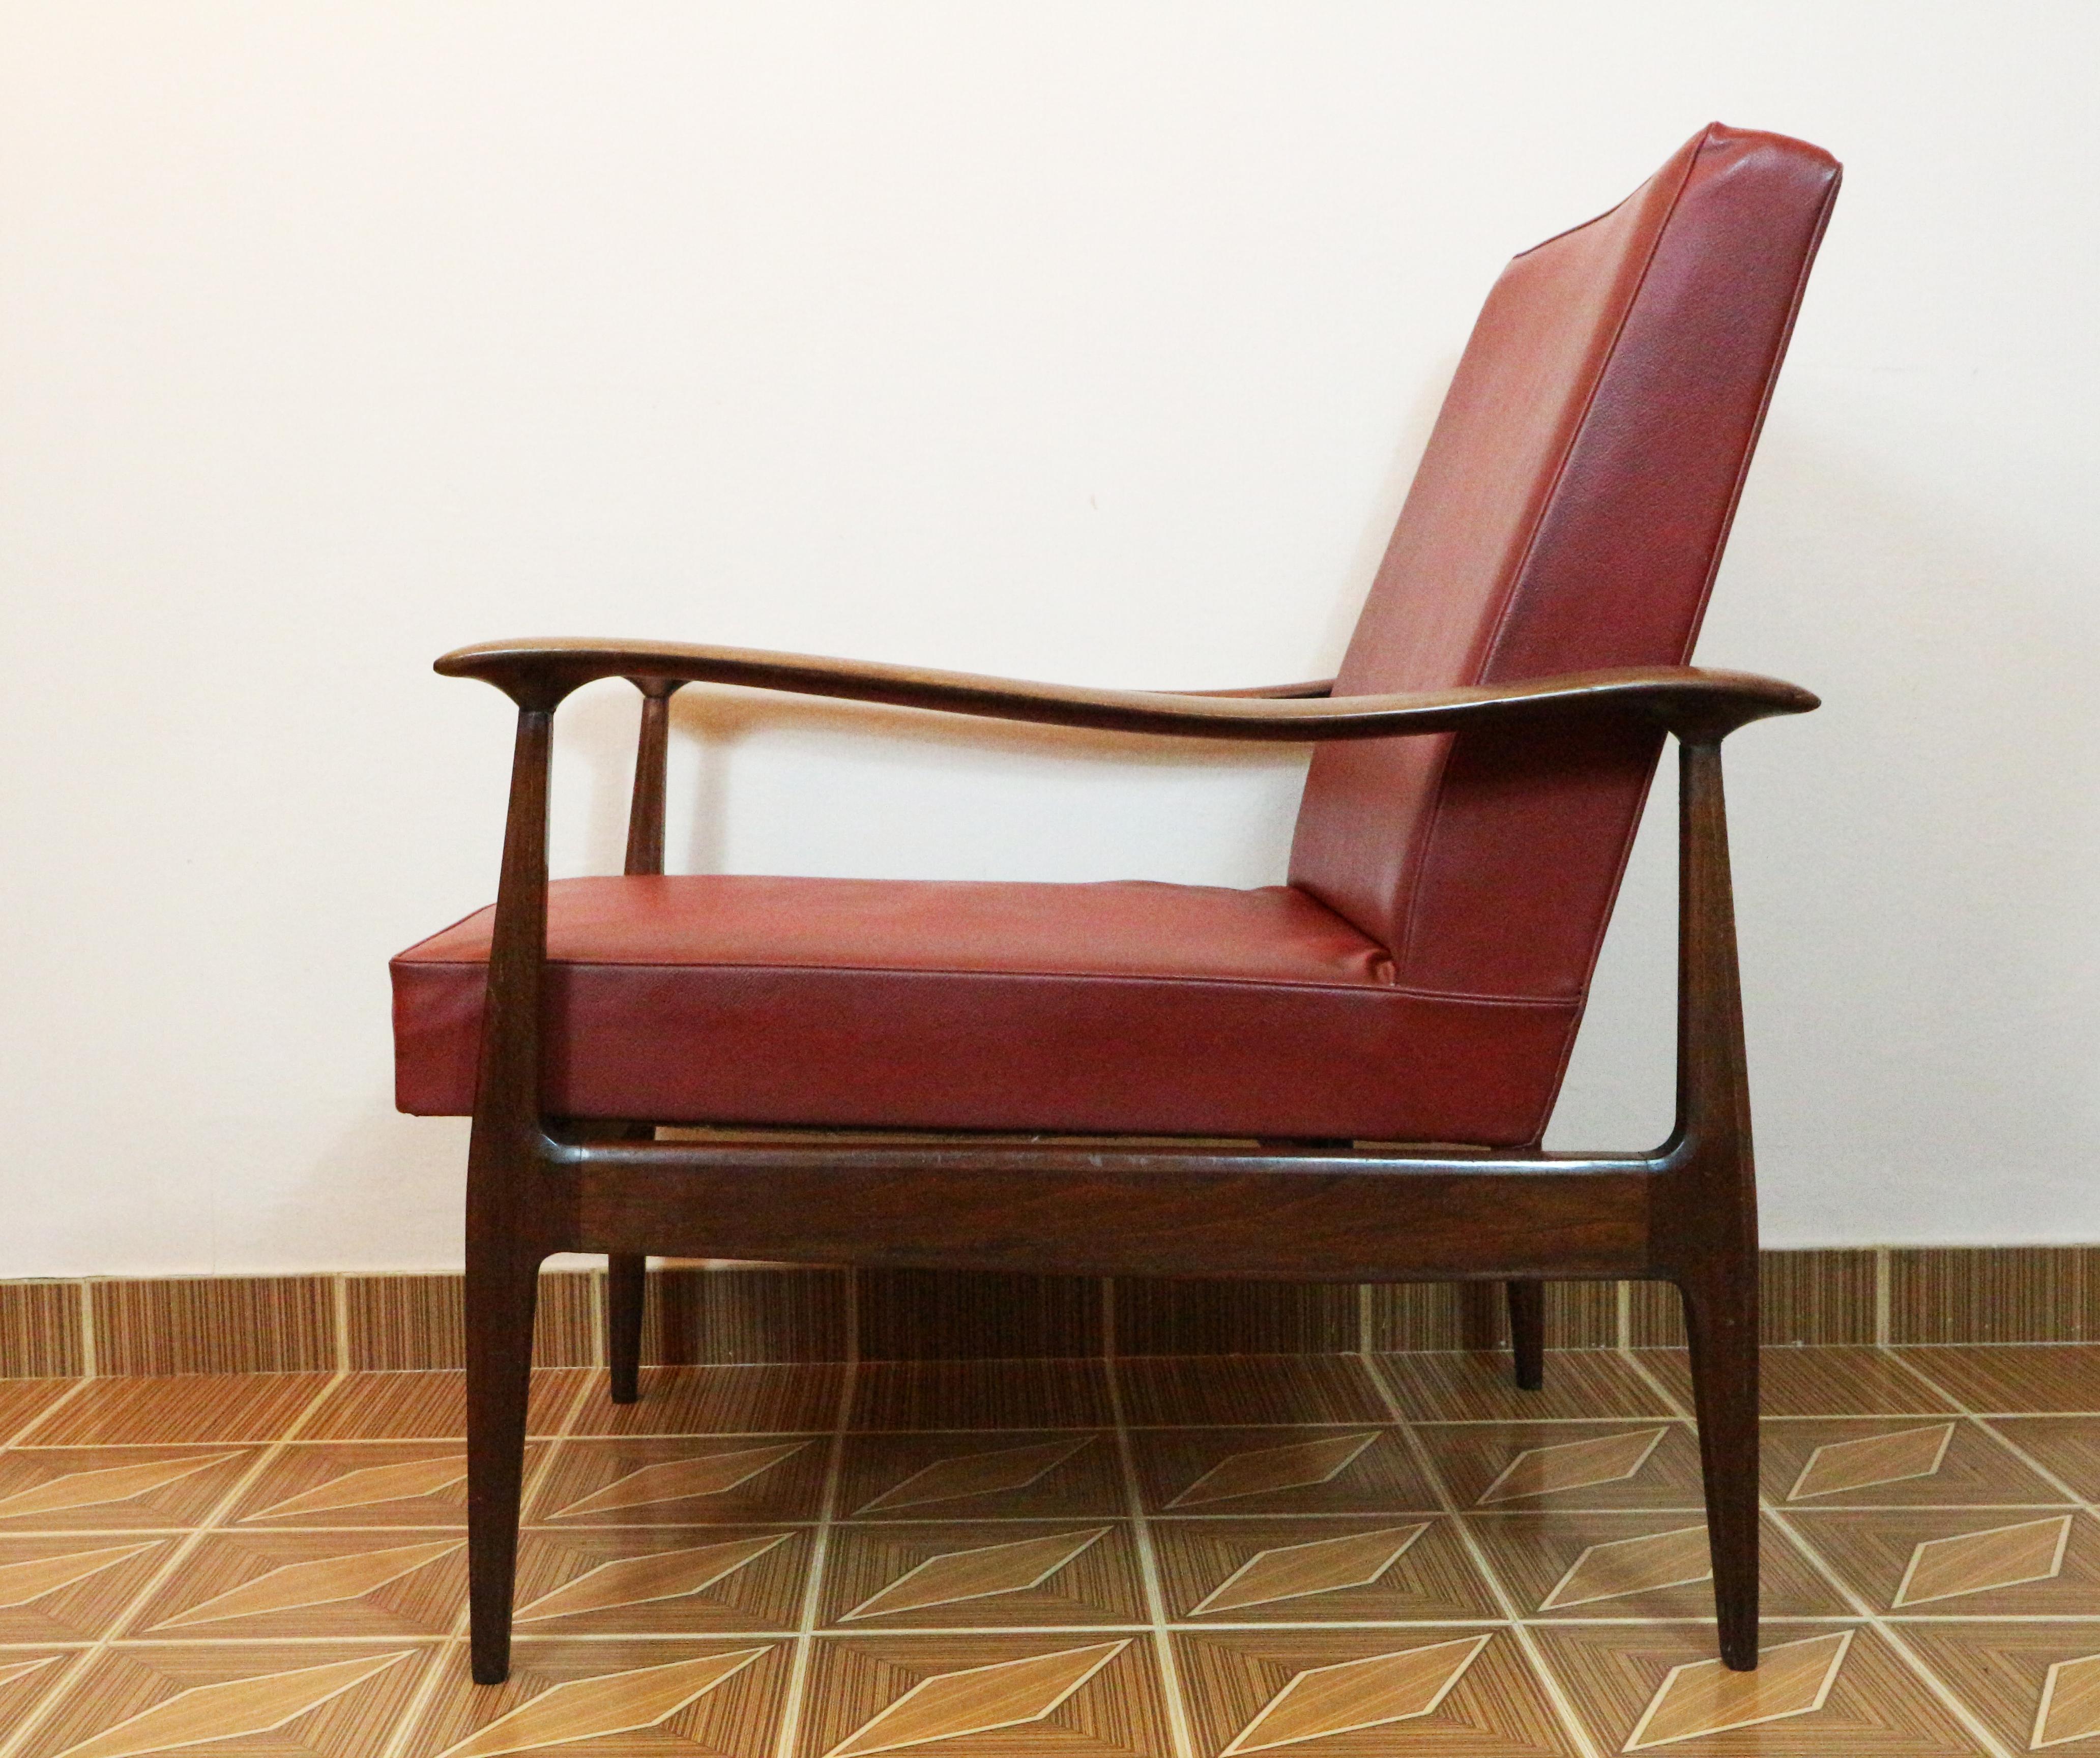 Pair of 1960s beechwood and imitation leather bordeaux office chairs.

We remain at your complete disposal for any other needs.

Lustri -
Italy